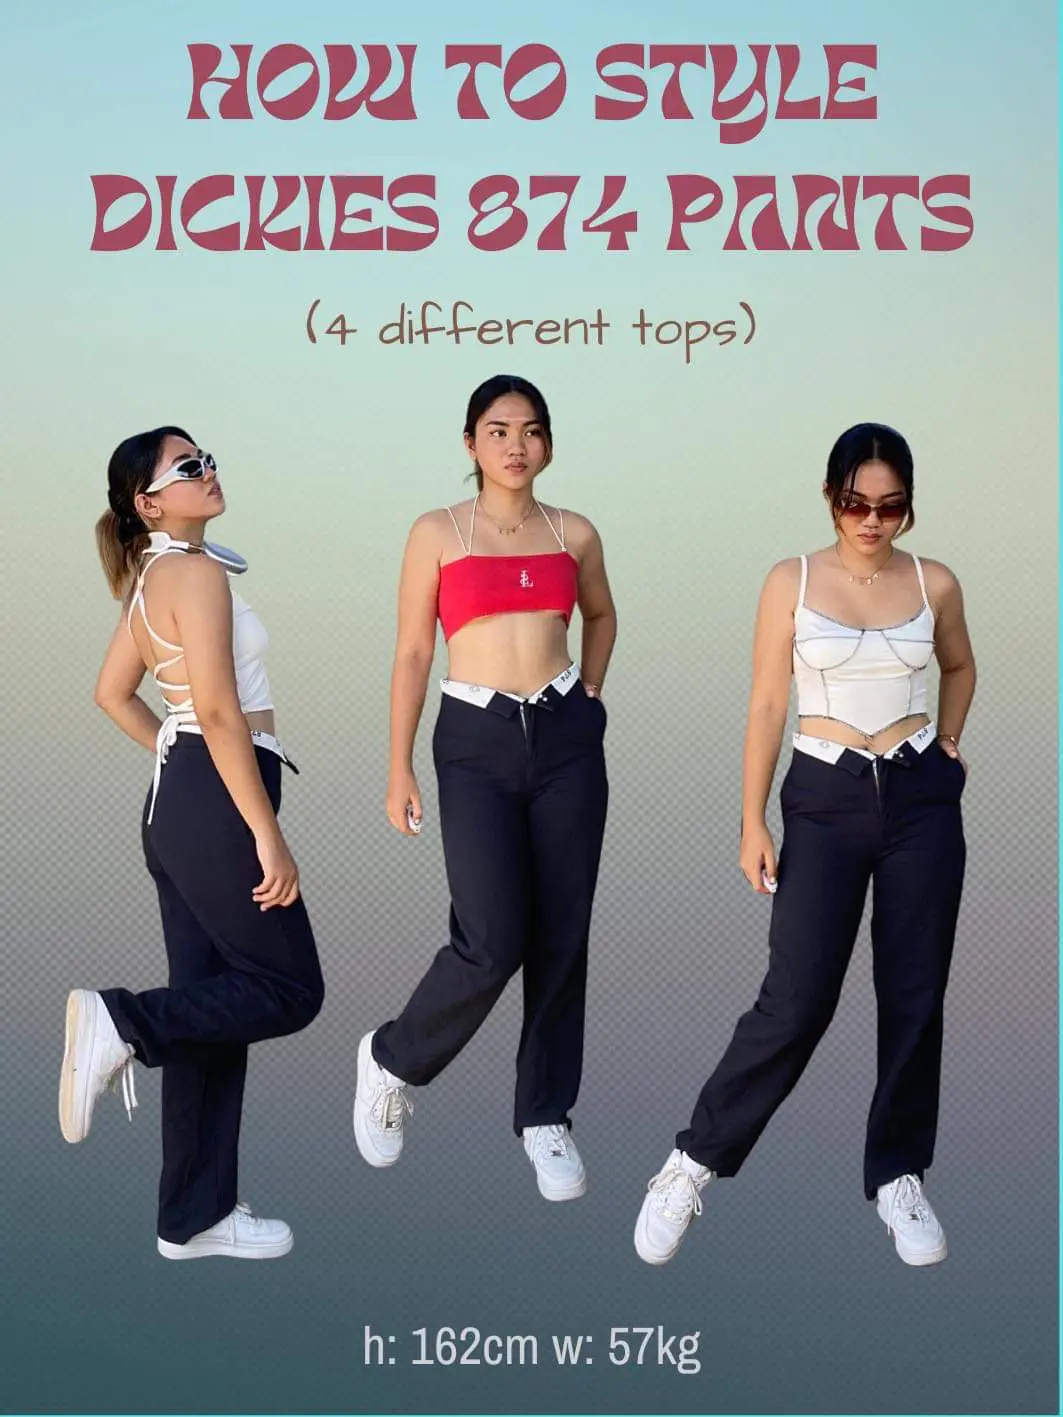 casual street style  Jeans outfit women, Dickies outfit, Dickies 874 outfit  women